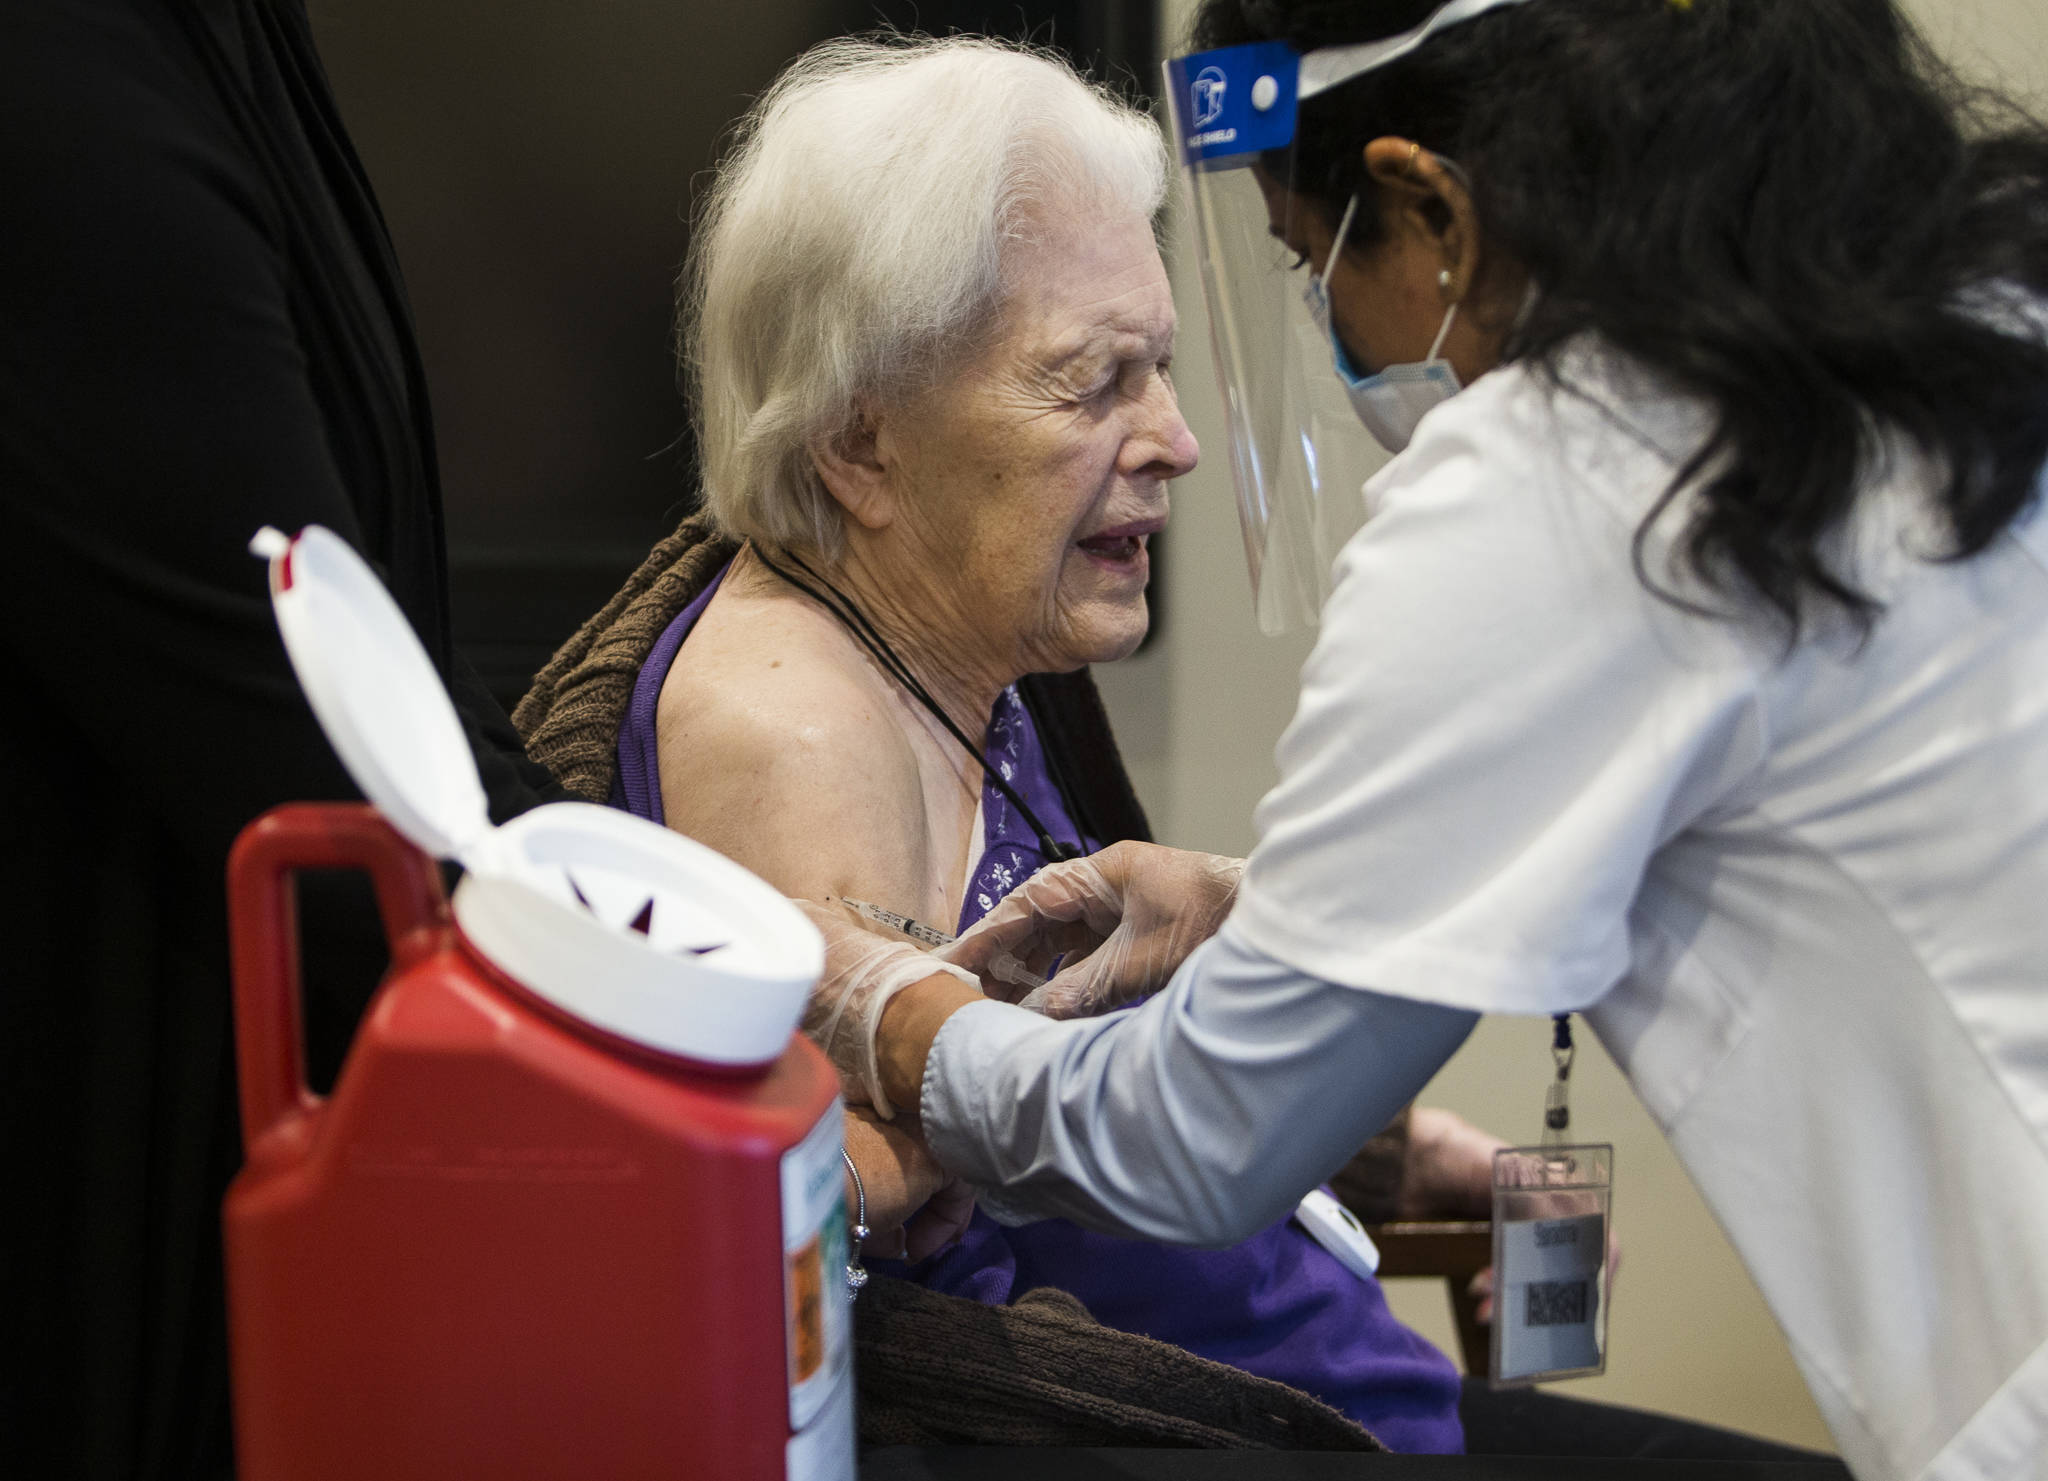 Jackie Hoernor winces as she gets her Pfizer COVID-19 vaccination during a Walgreen’s Vaccine Clinic at South Pointe on Friday, Feb. 12, 2021, in Everett, Washington. (Sound Publishing file photo)